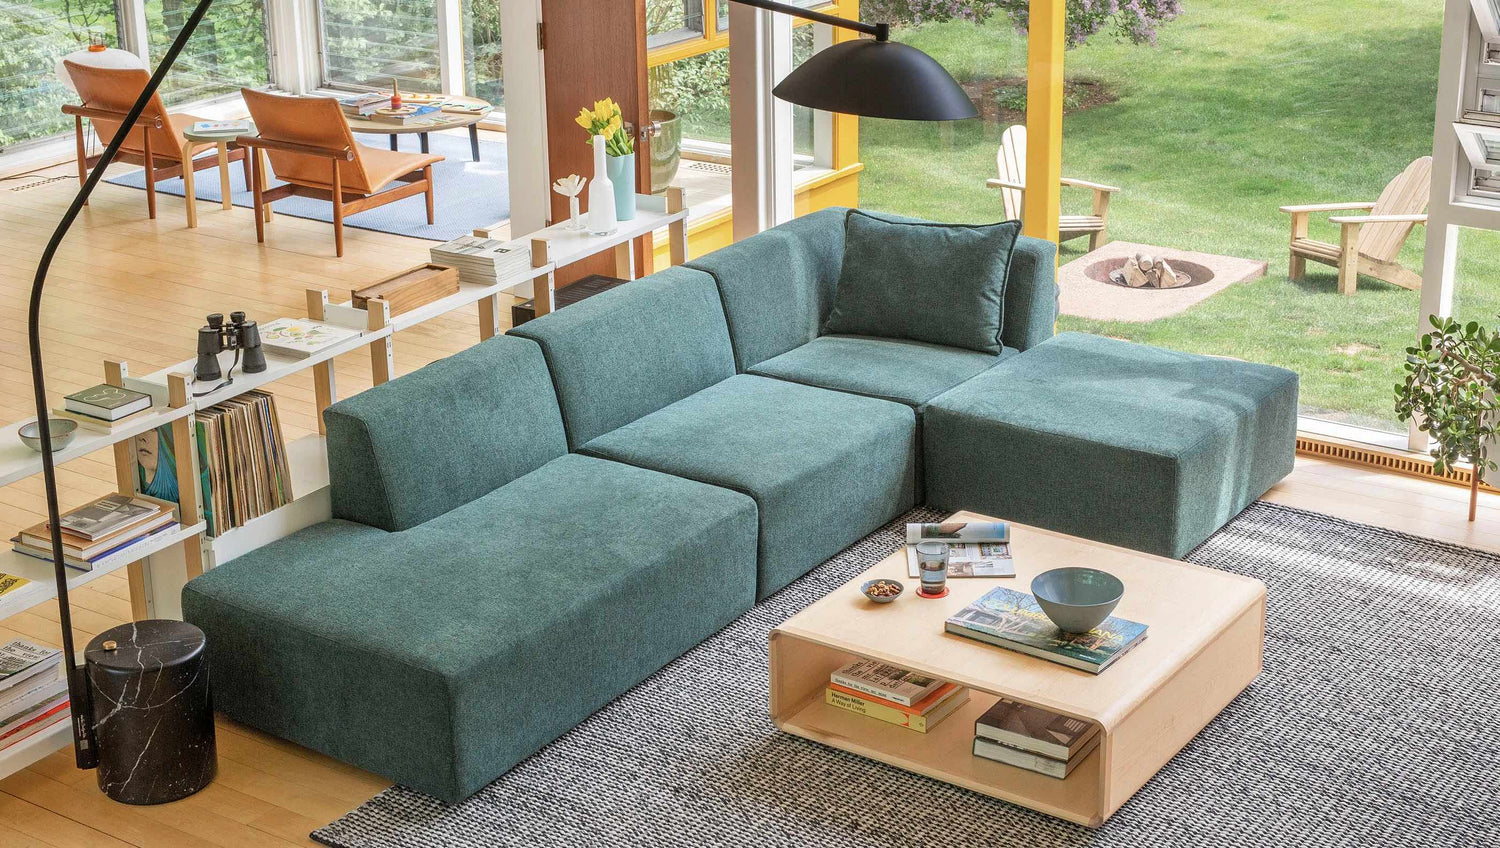 A modern living room with a large teal sectional sofa, a light wood coffee table, and a black floor lamp. The space features abundant natural light from large windows, an open bookshelf, and a cozy seating area in the background by a garden, with wooden furniture.